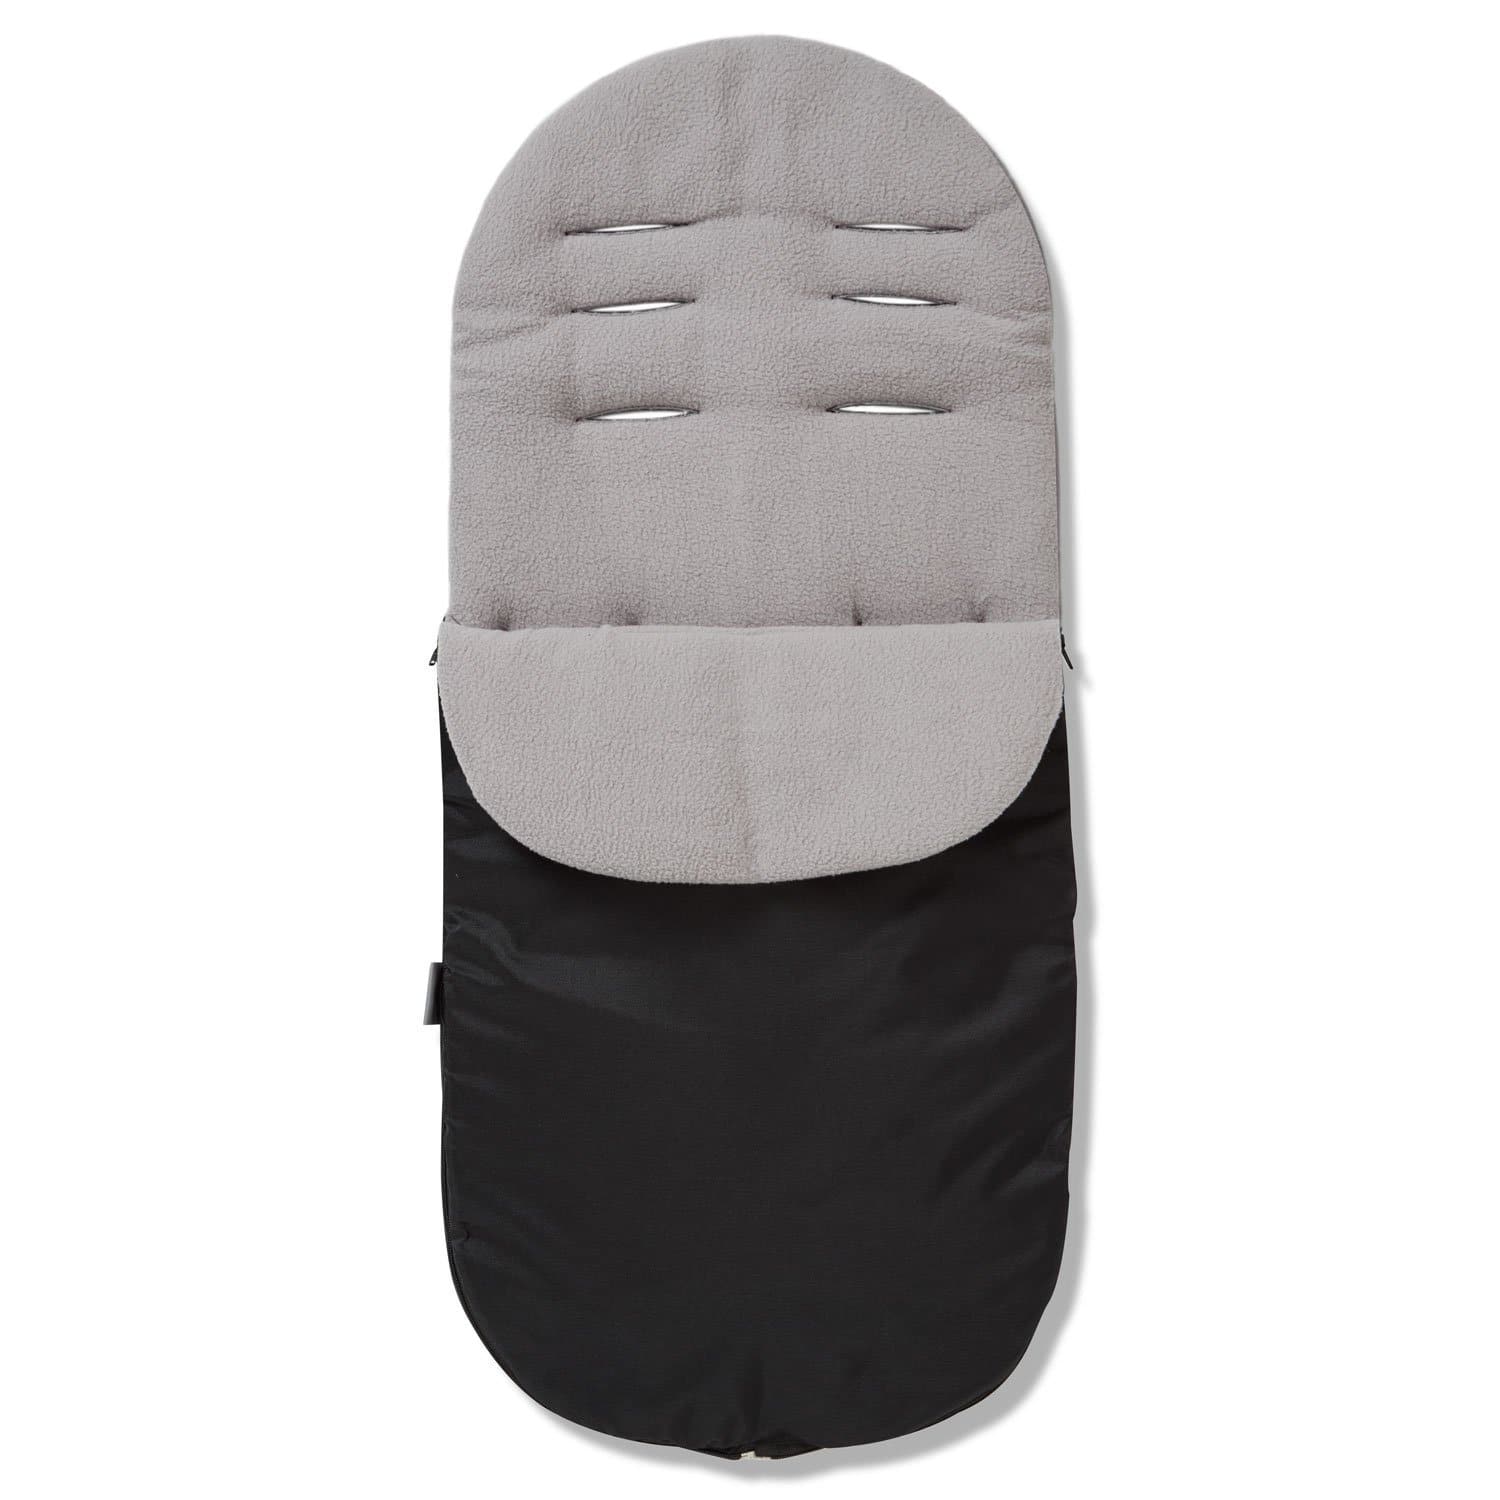 Footmuff / Cosy Toes Compatible with Bloom - Grey / Fits All Models | For Your Little One